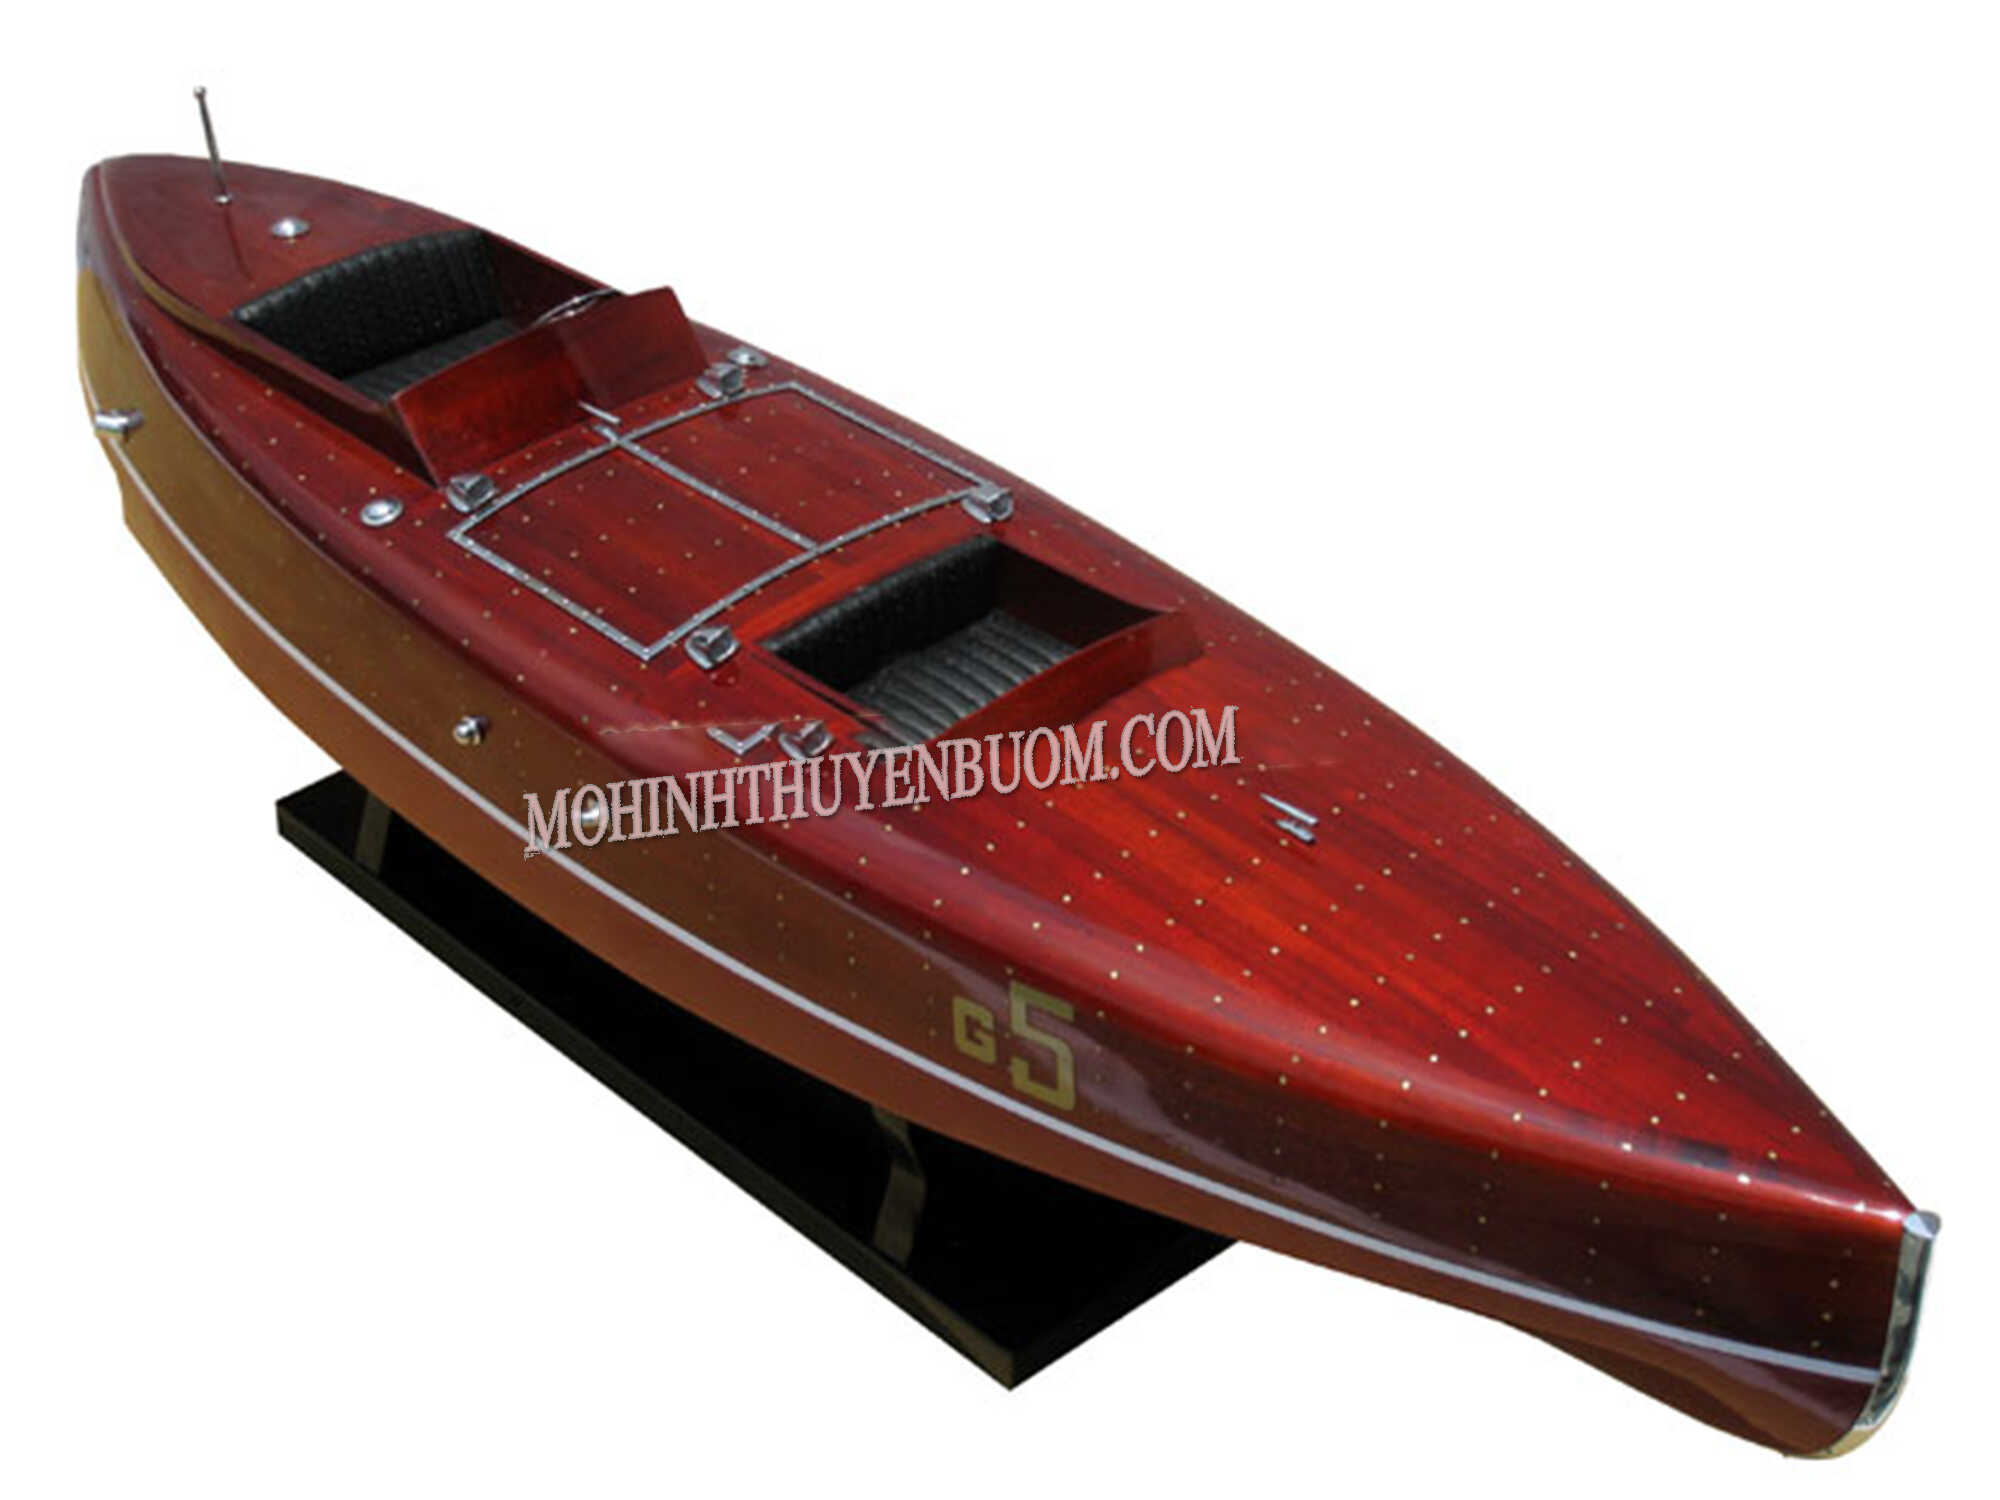 Chris Craft Deluxe Classic Boat Model 33.4"